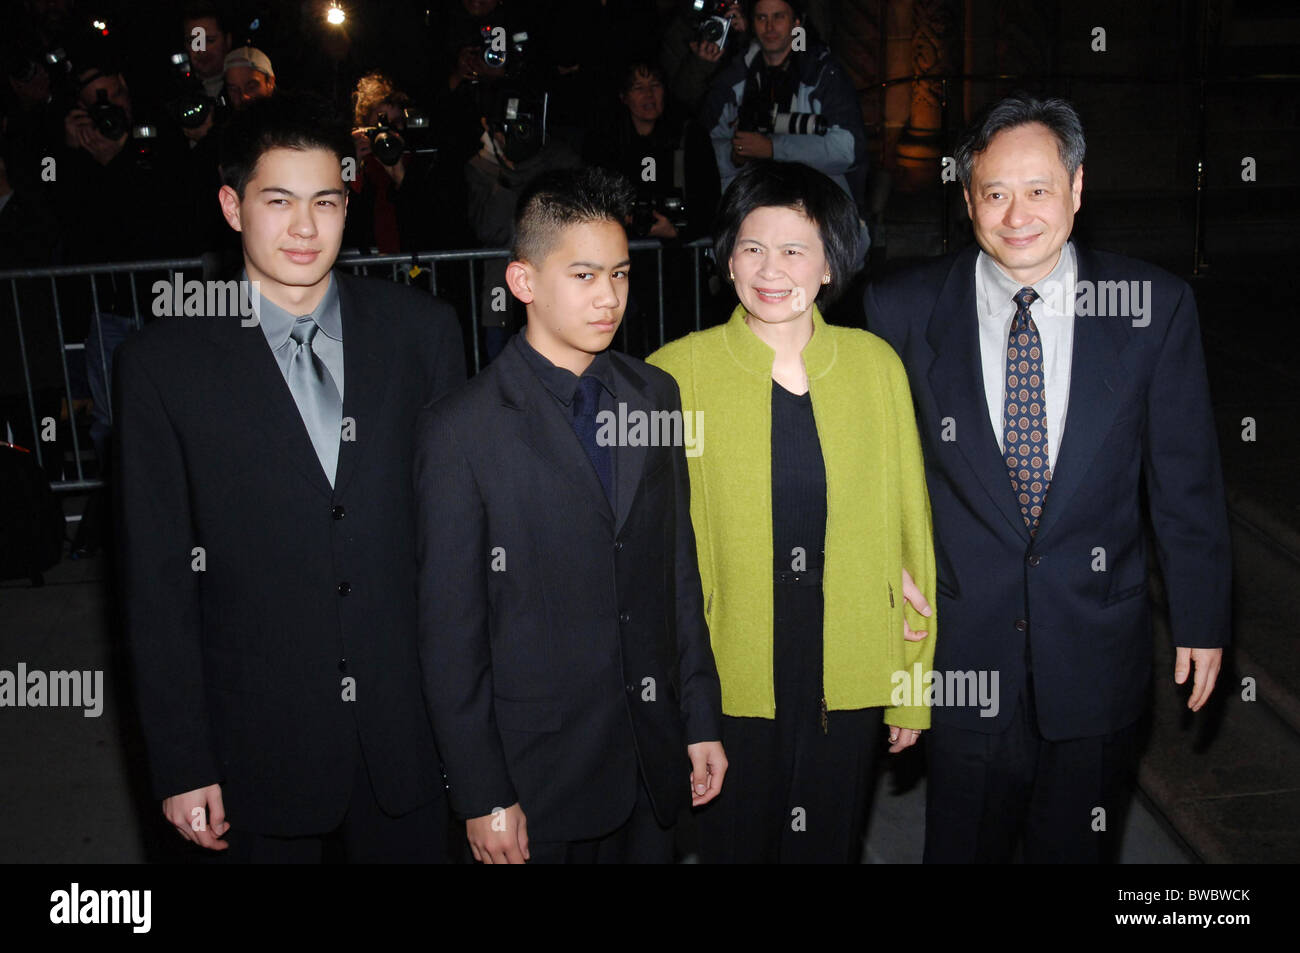 Ang lee and family hi-res stock photography and images - Alamy